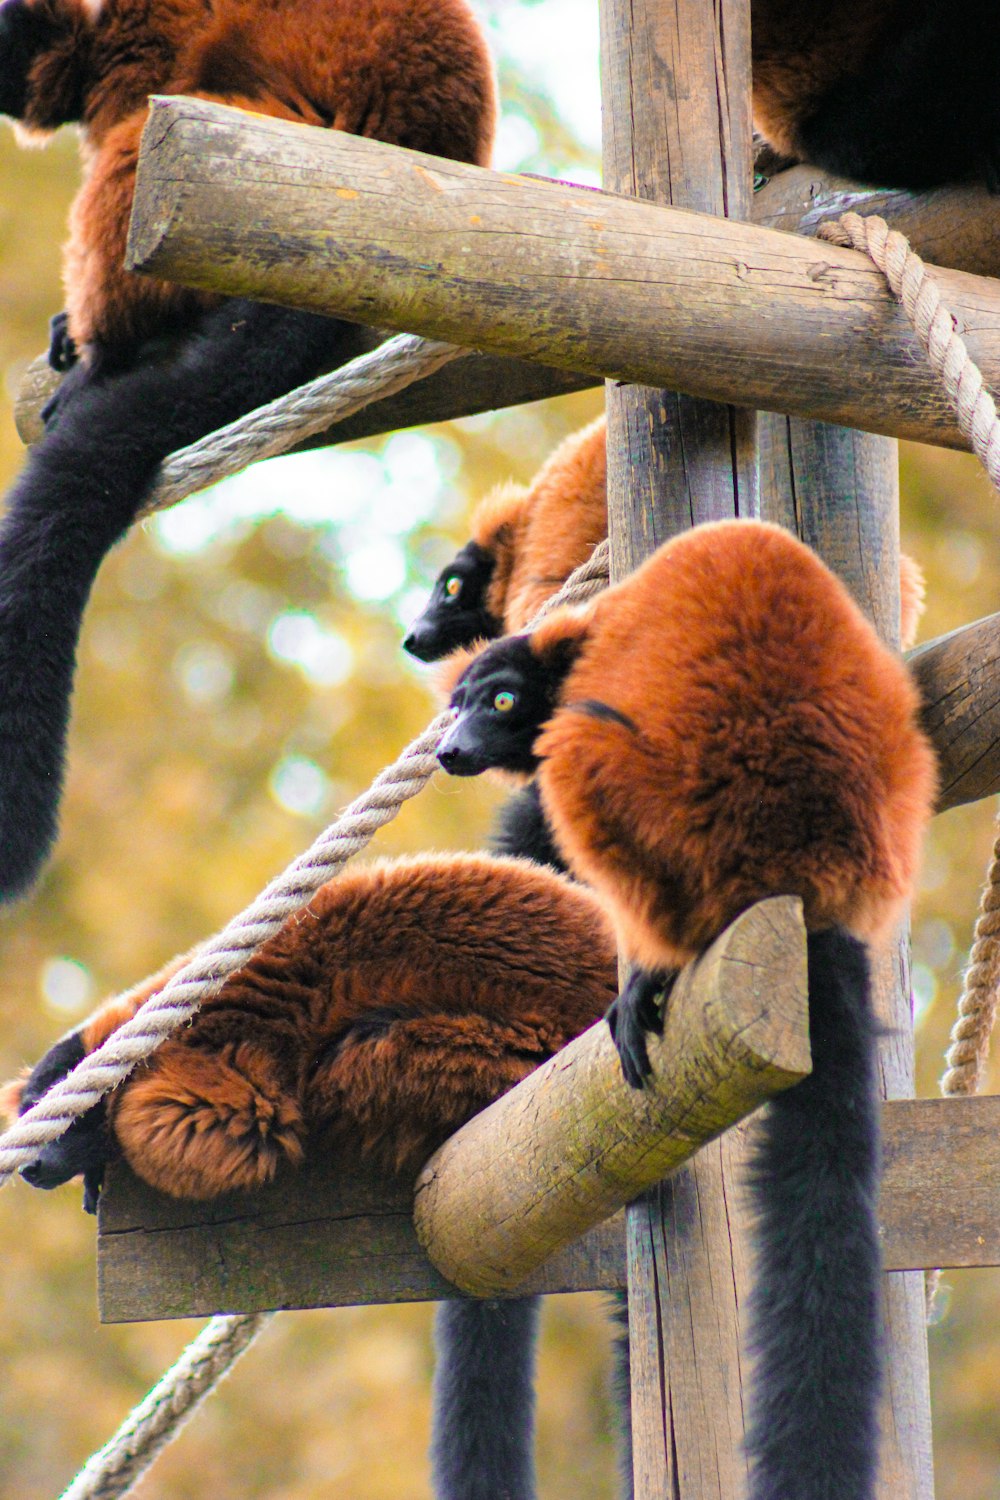 a group of red ruffed animals climbing up a wooden structure